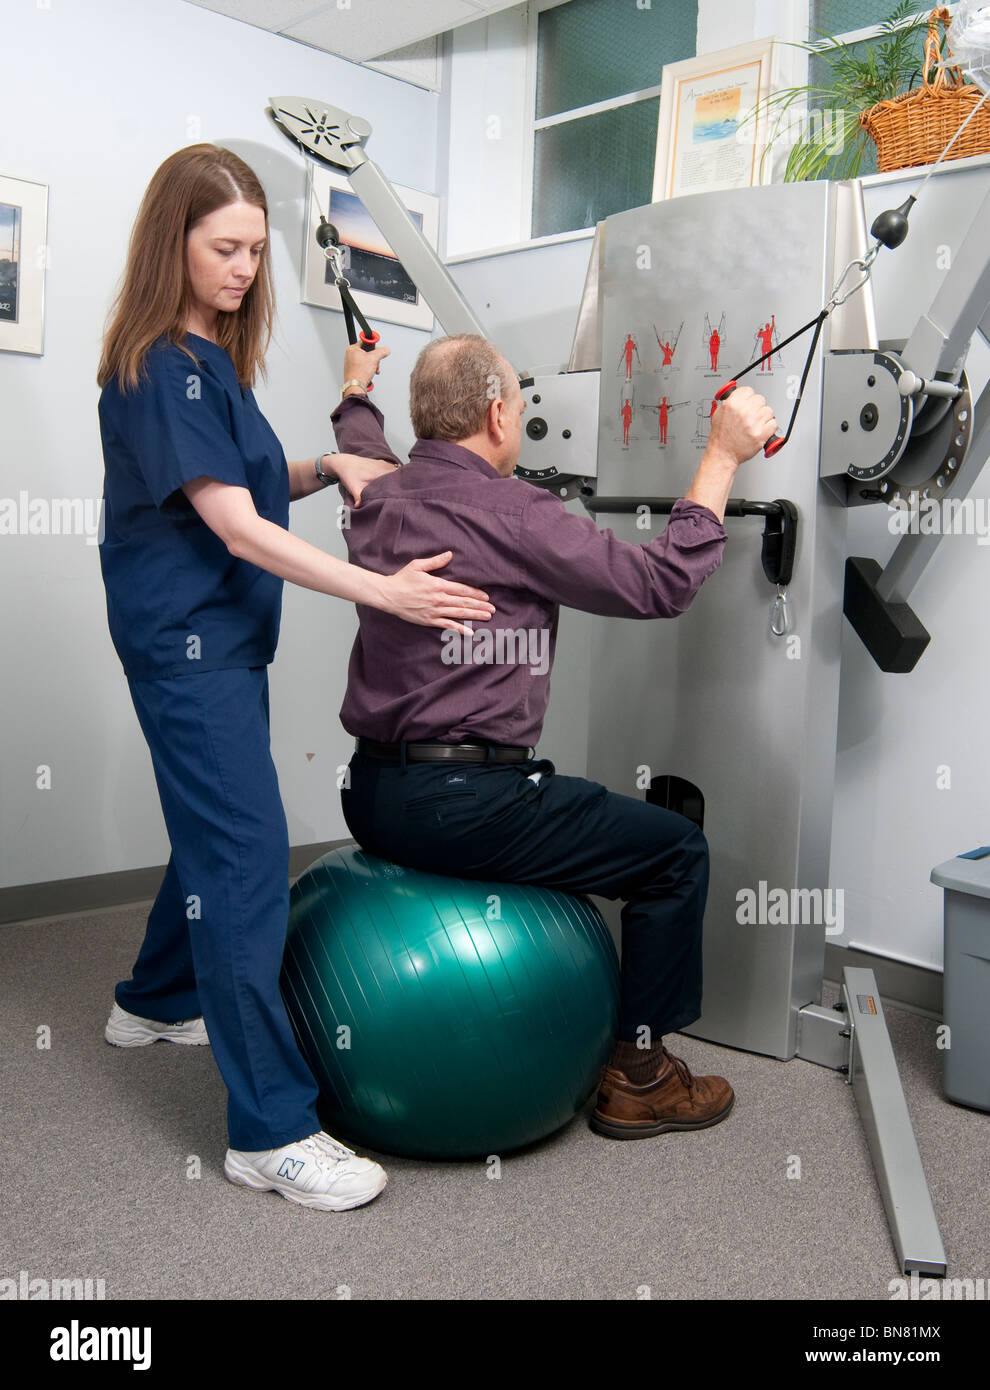 Physical therapist working with an older man on his lower trapezius muscle Stock Photo